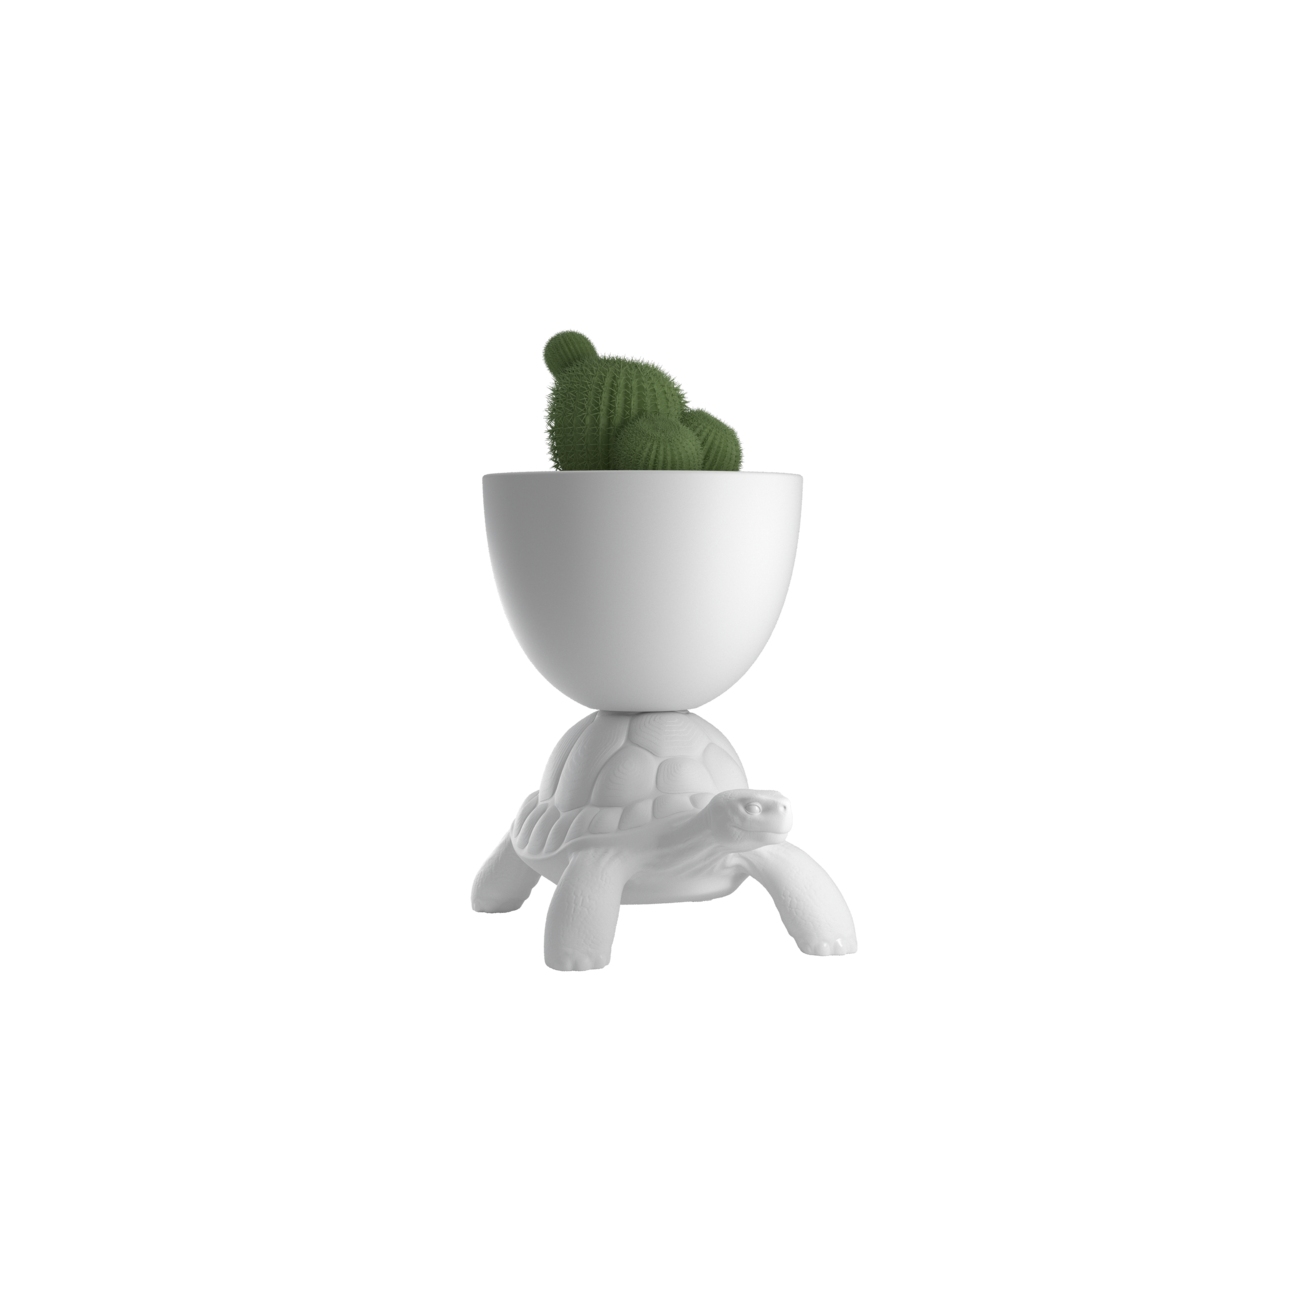 QEEBOO TURTLE CARRY PLANTER AND CHAMPAGNE COOLER